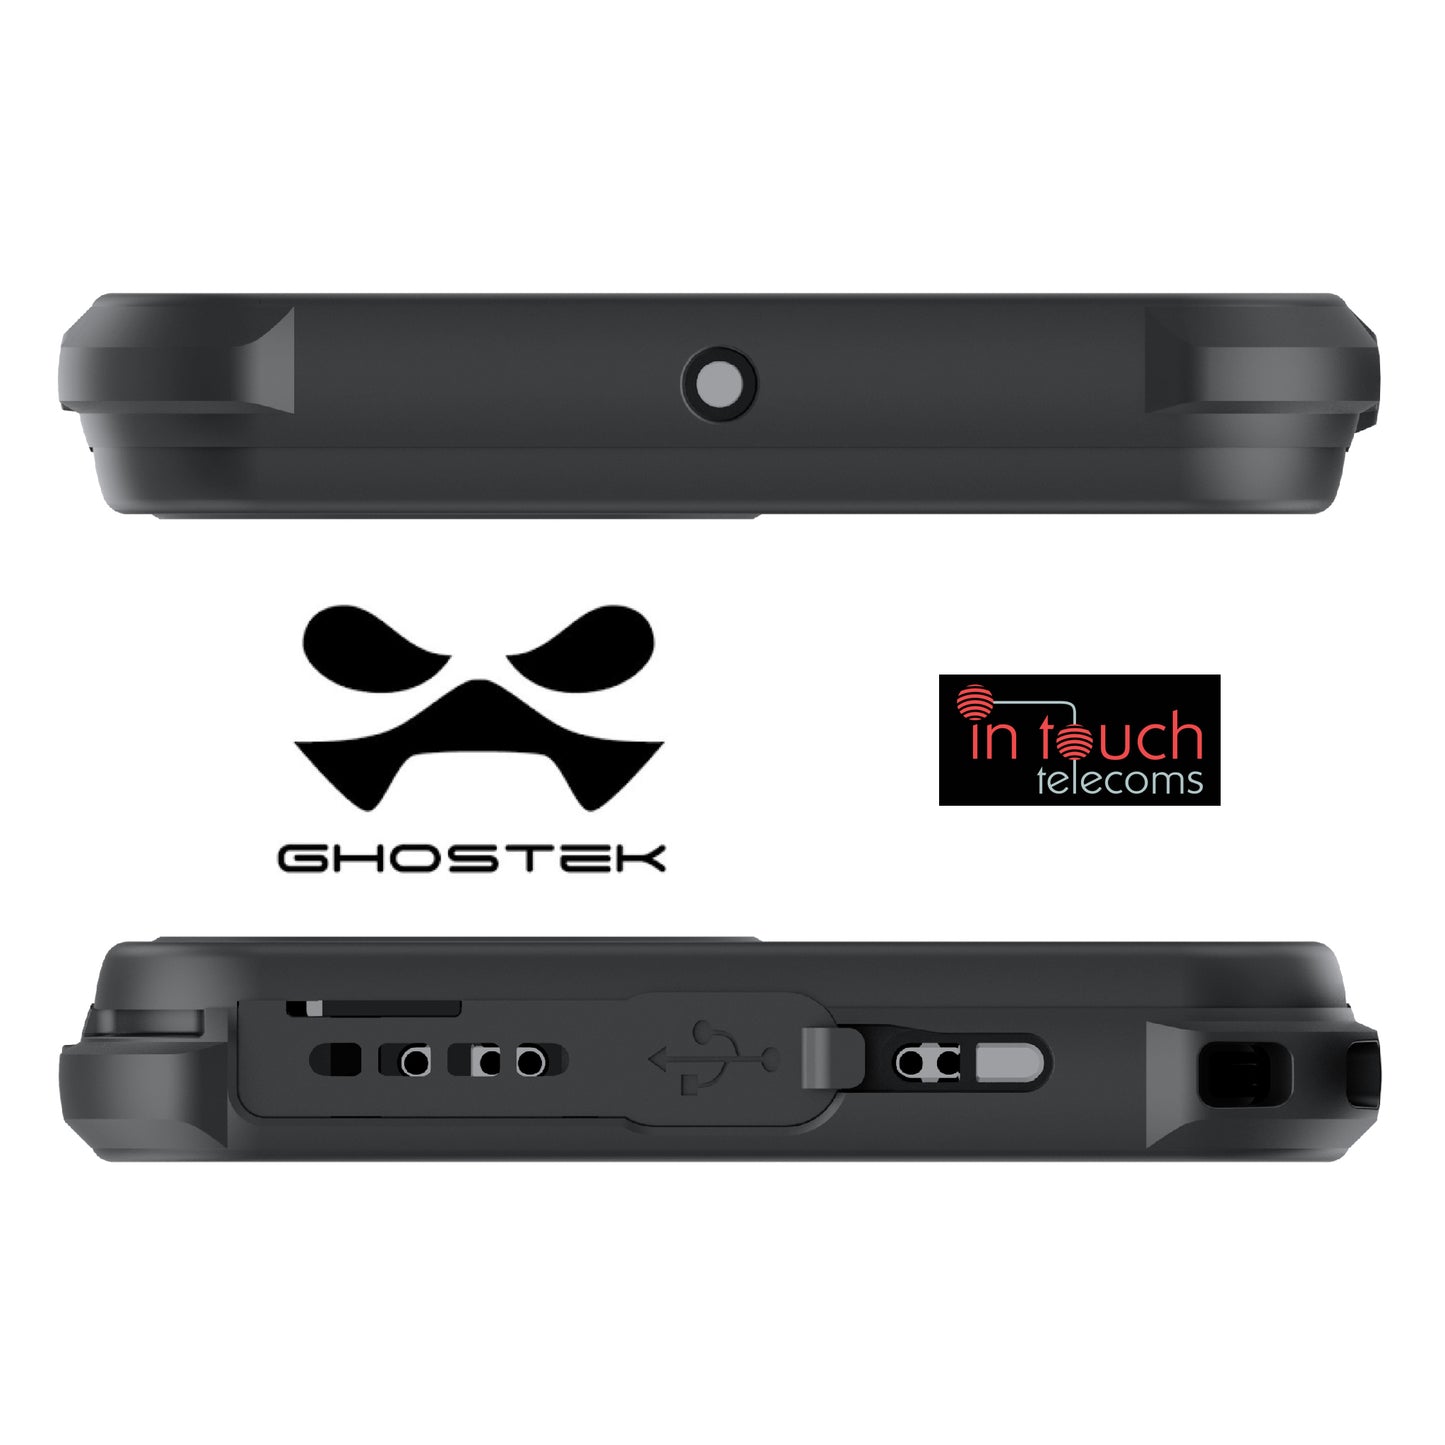 Ghostek Nautical 3 Case for iPhone 12 6.1" | Military Grade 360°